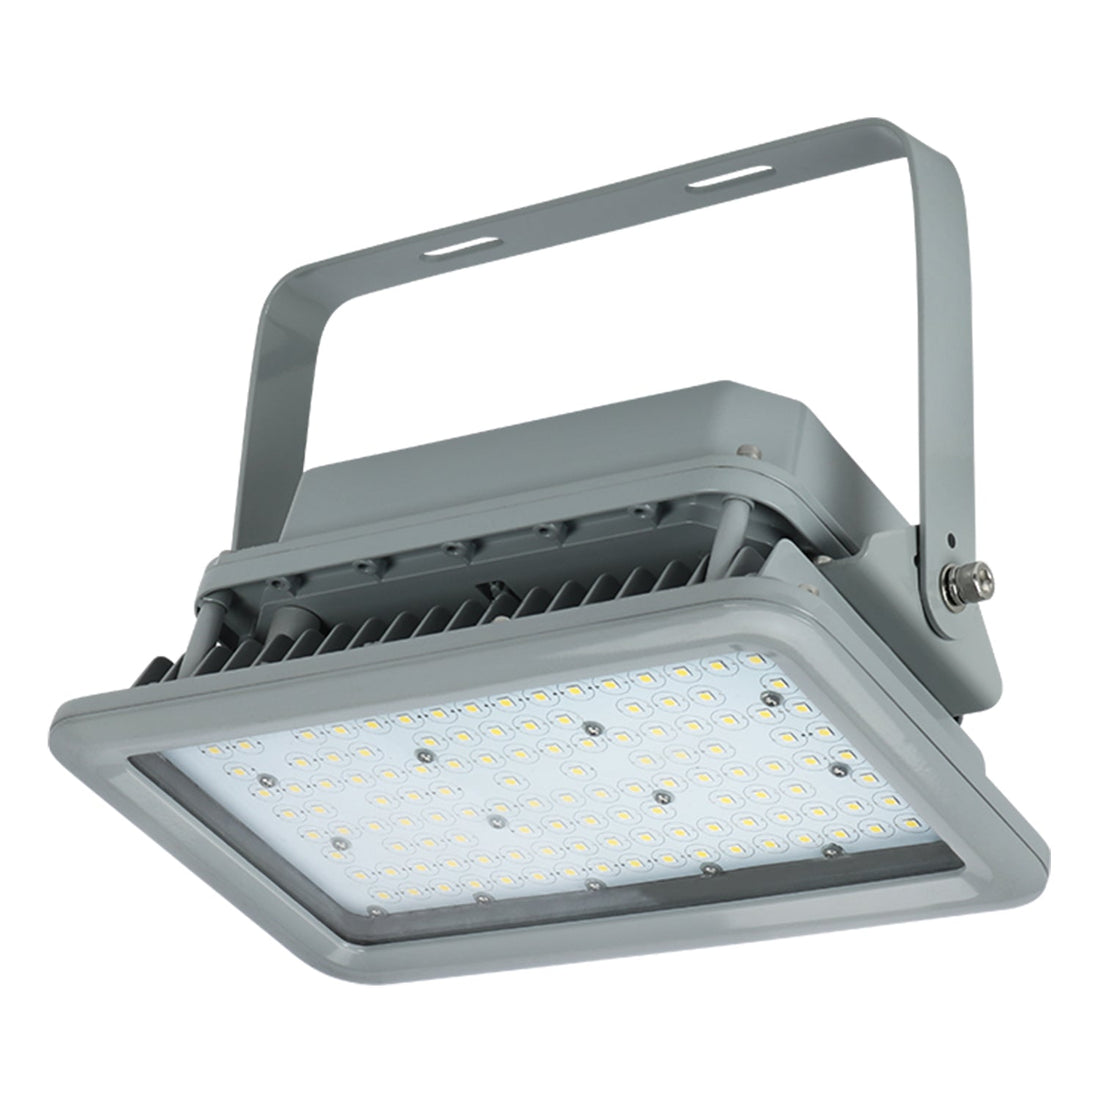 100W LED Explosion-Proof Flood Light for Hazardous Locations - Dimmable, 5000K, 13500LM, IP66 Rated, Flexible and Reliable